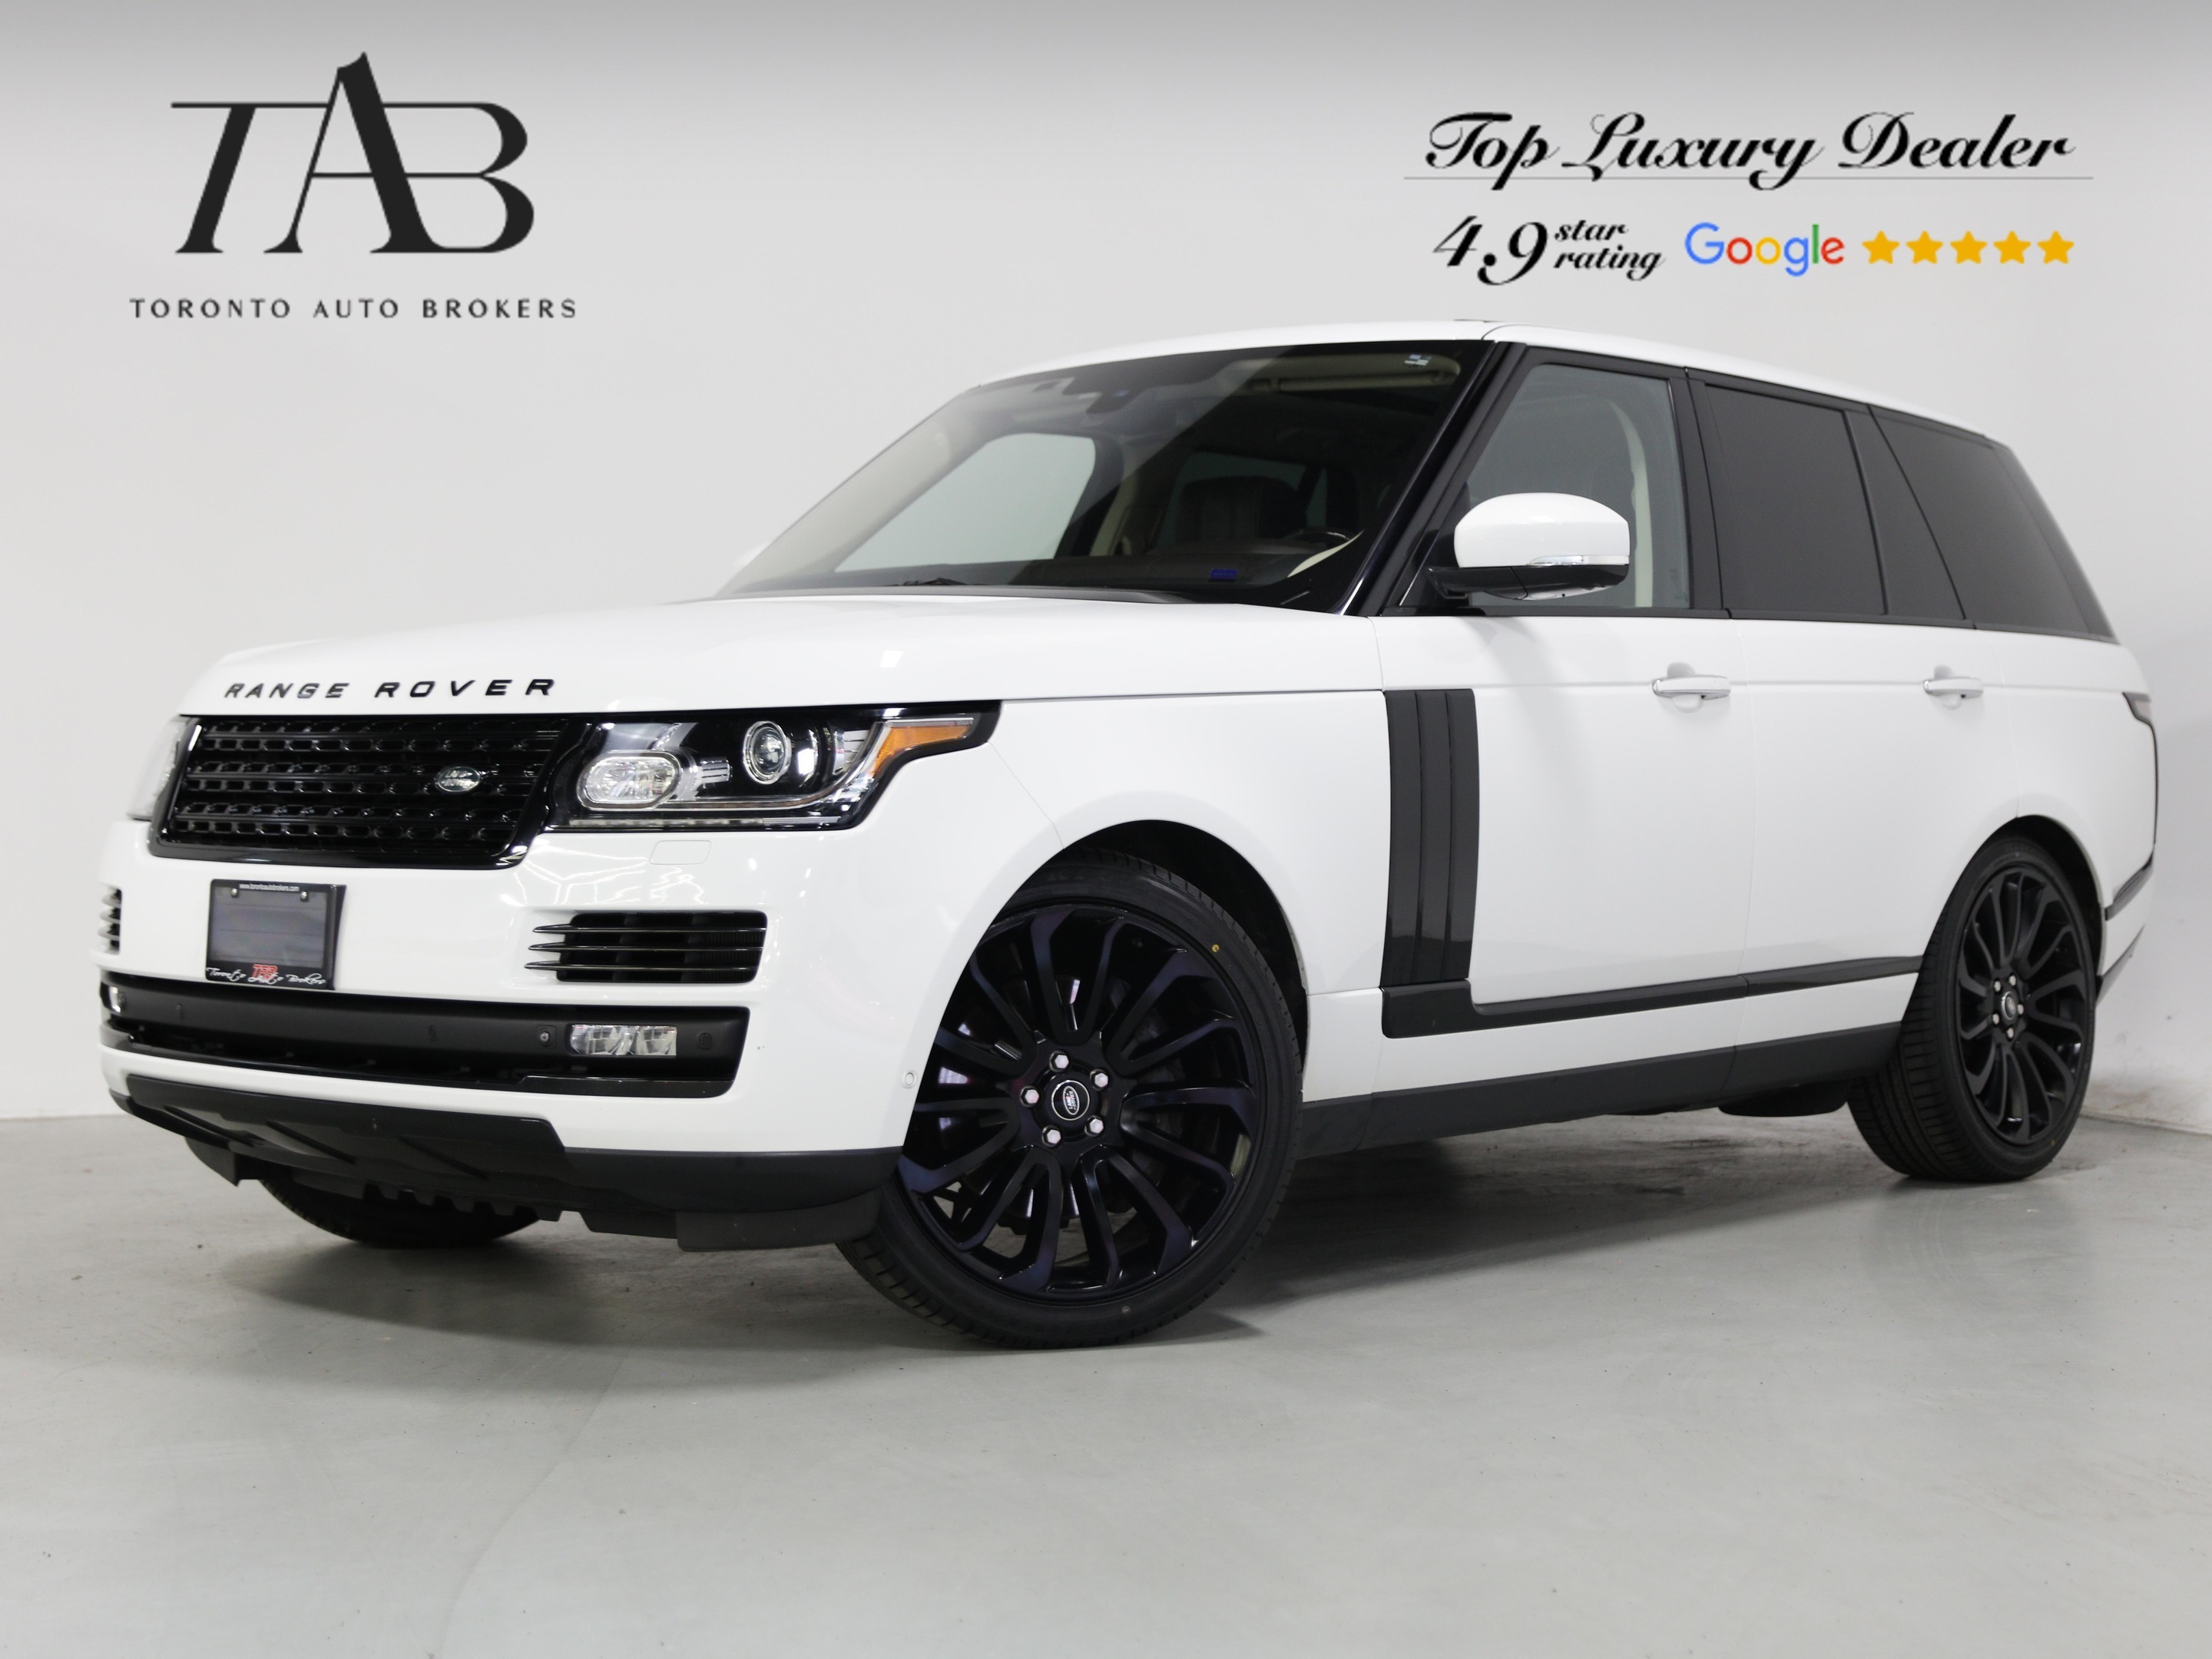 2015 Land Rover Range Rover AUTOBIOGRAPHY | 22 IN WHEELS | EXECUTIVE SEATING